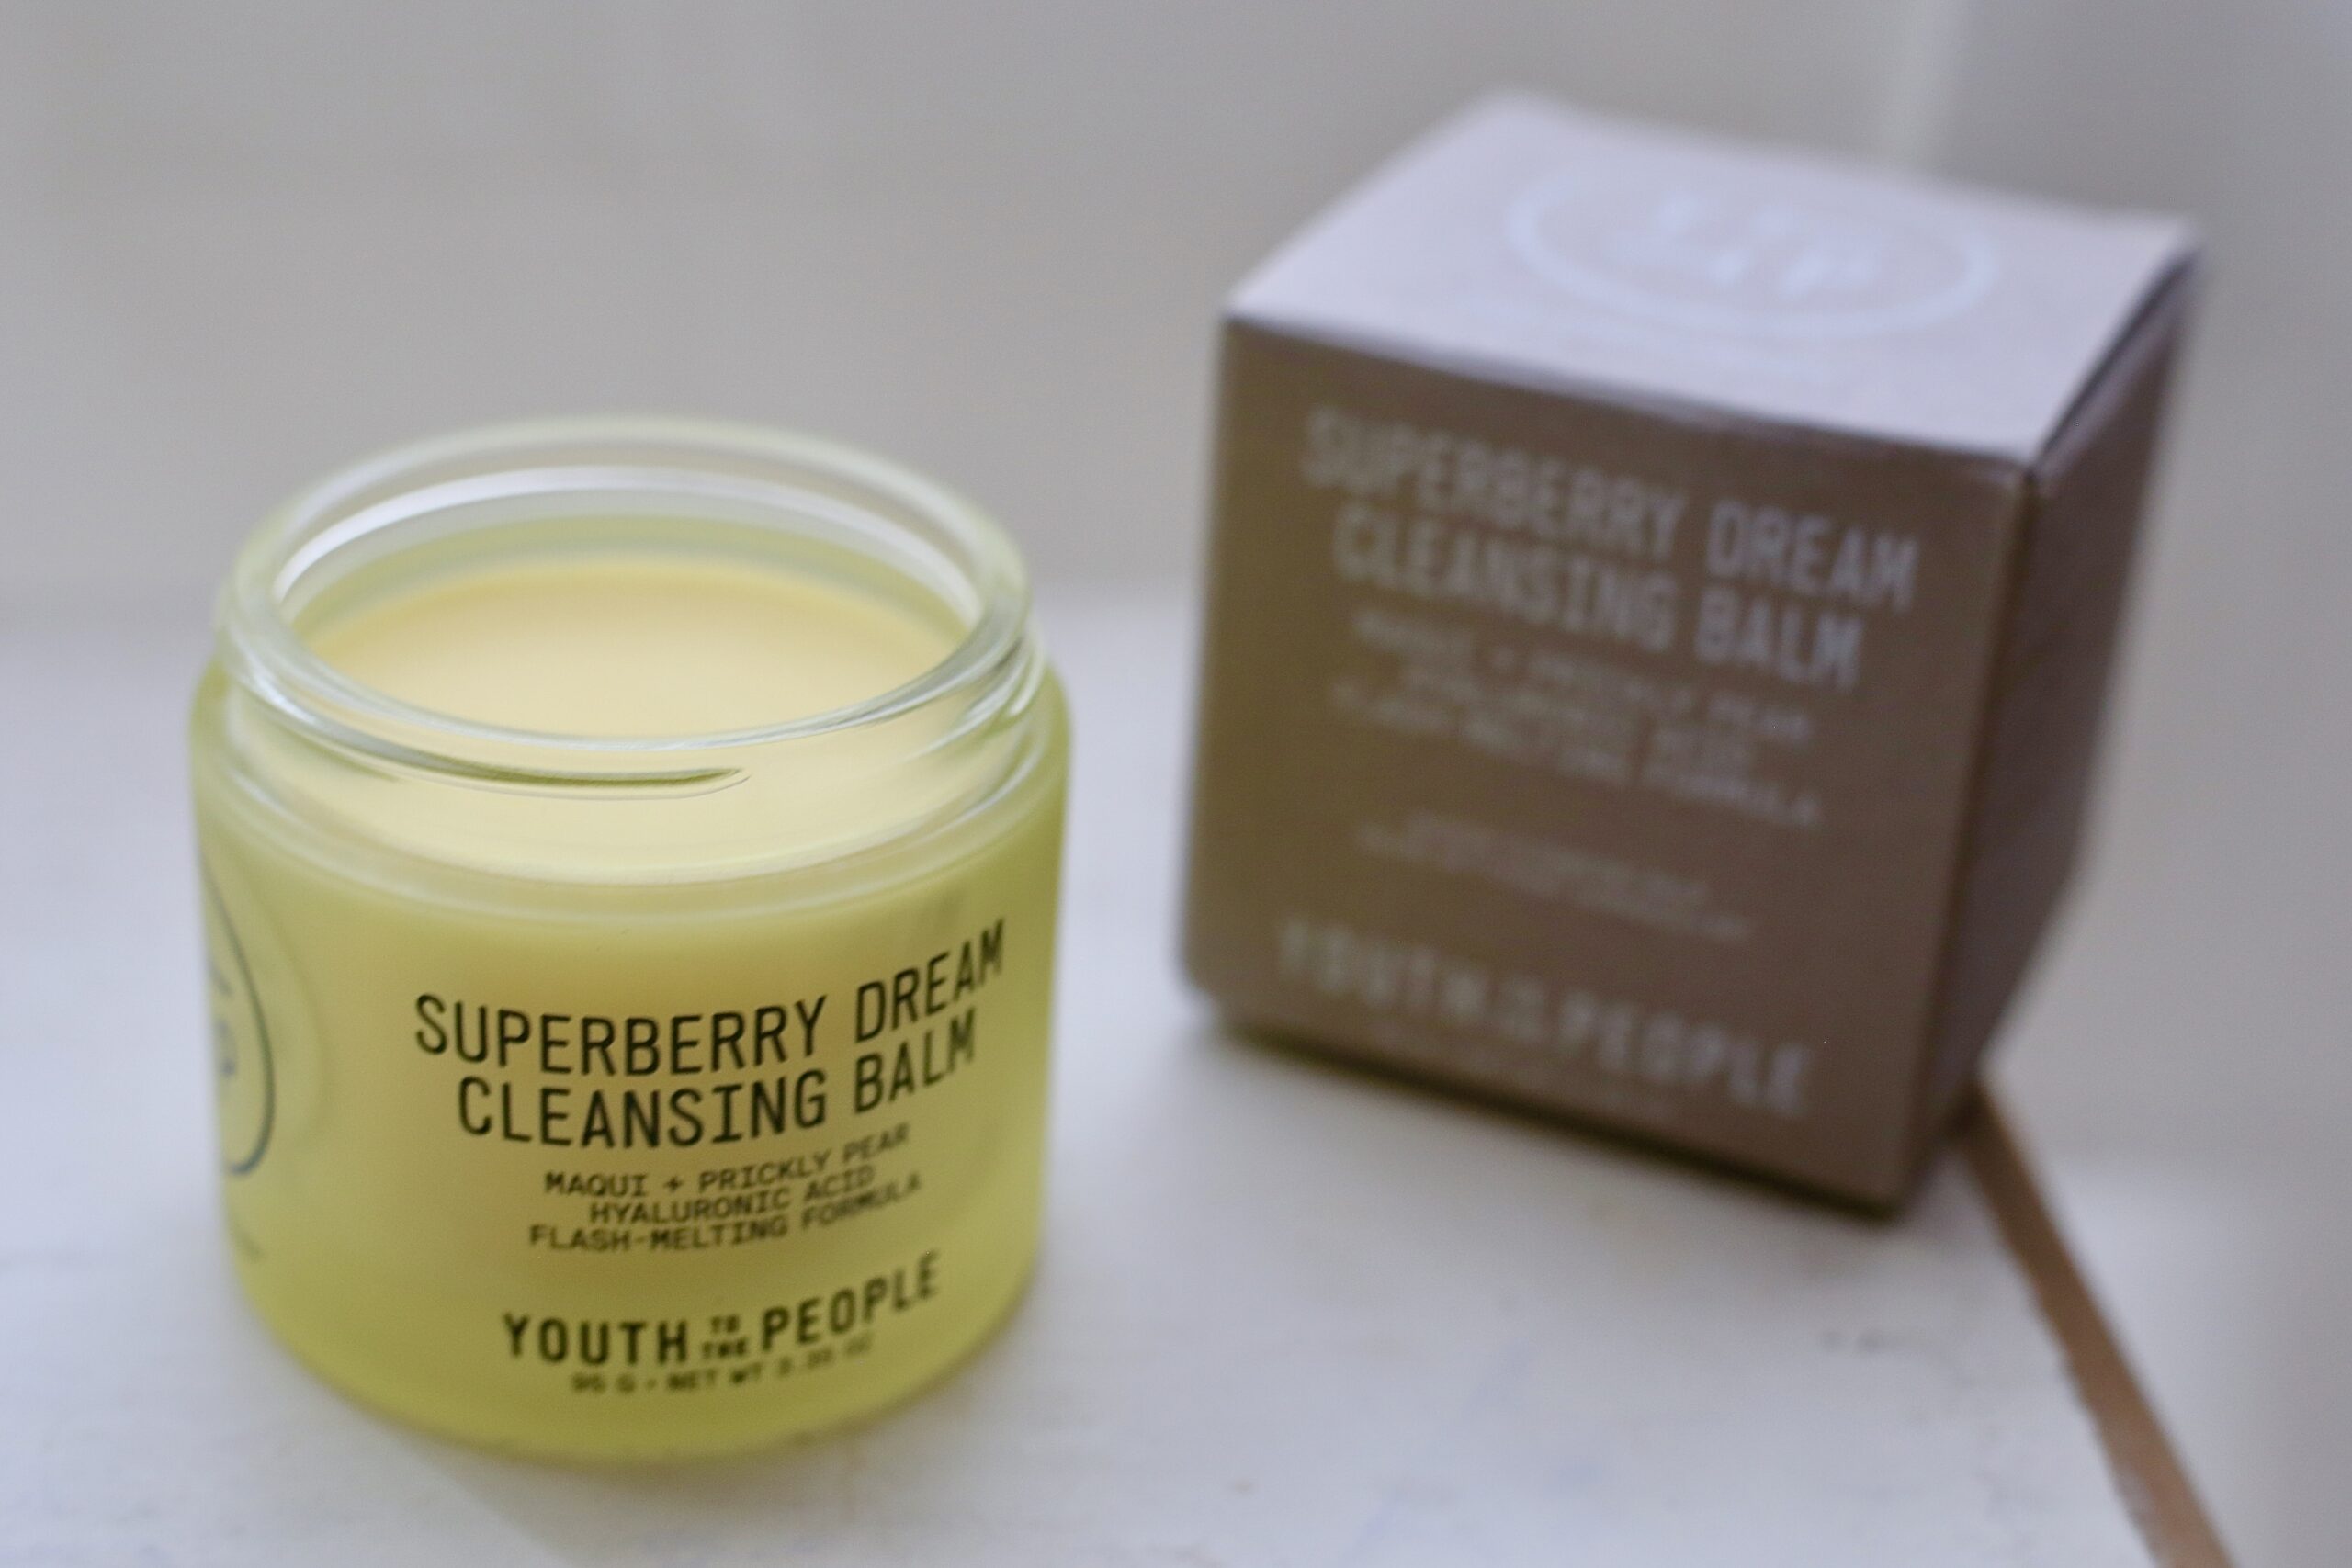 Youth to the people cleansing balm